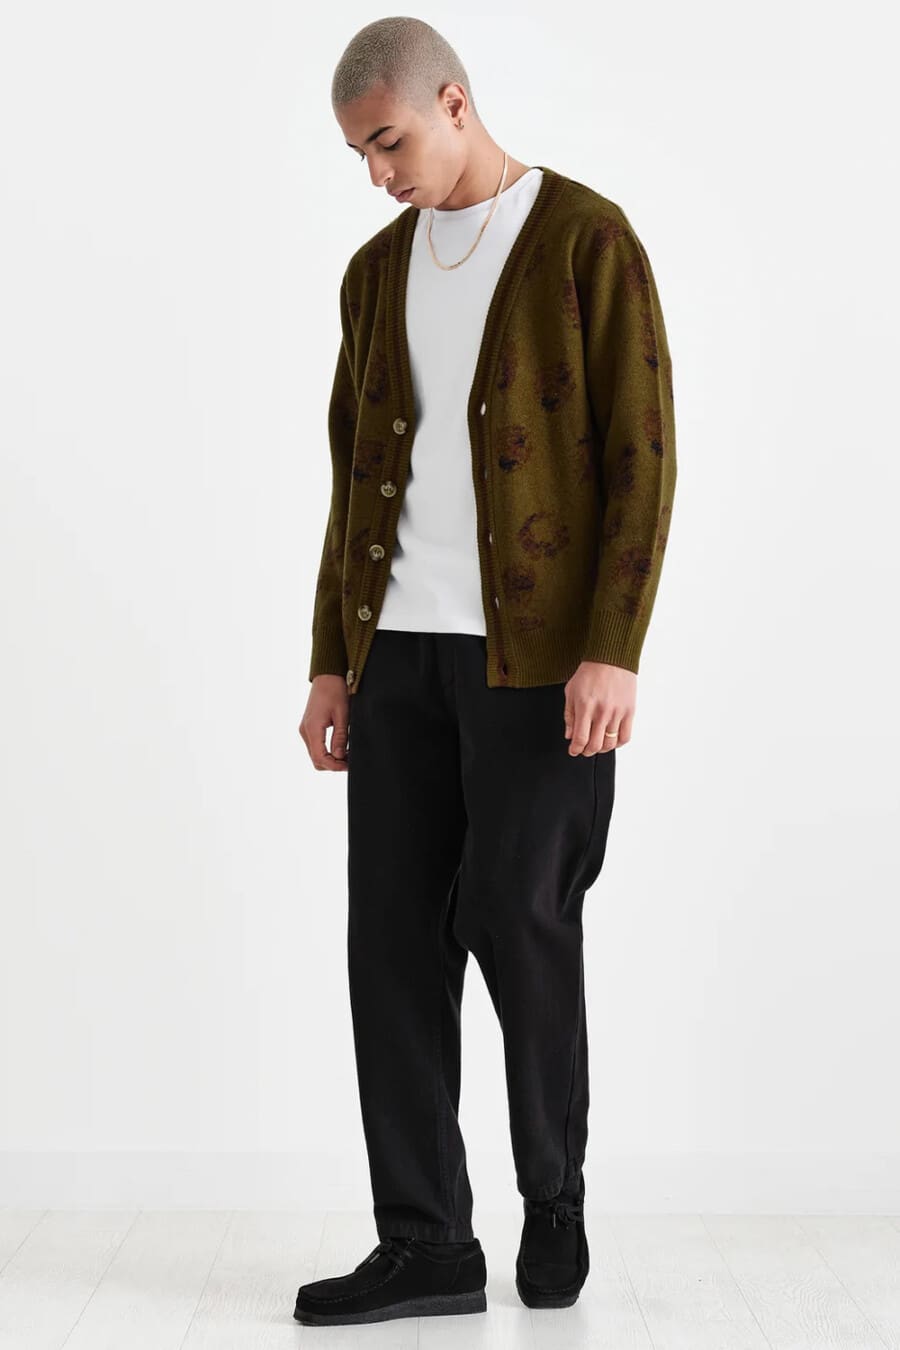 Men's black wide pants, white T-shirt, patterned green cardigan, black suede Wallabee shoes and gold chain necklace grunge outfit